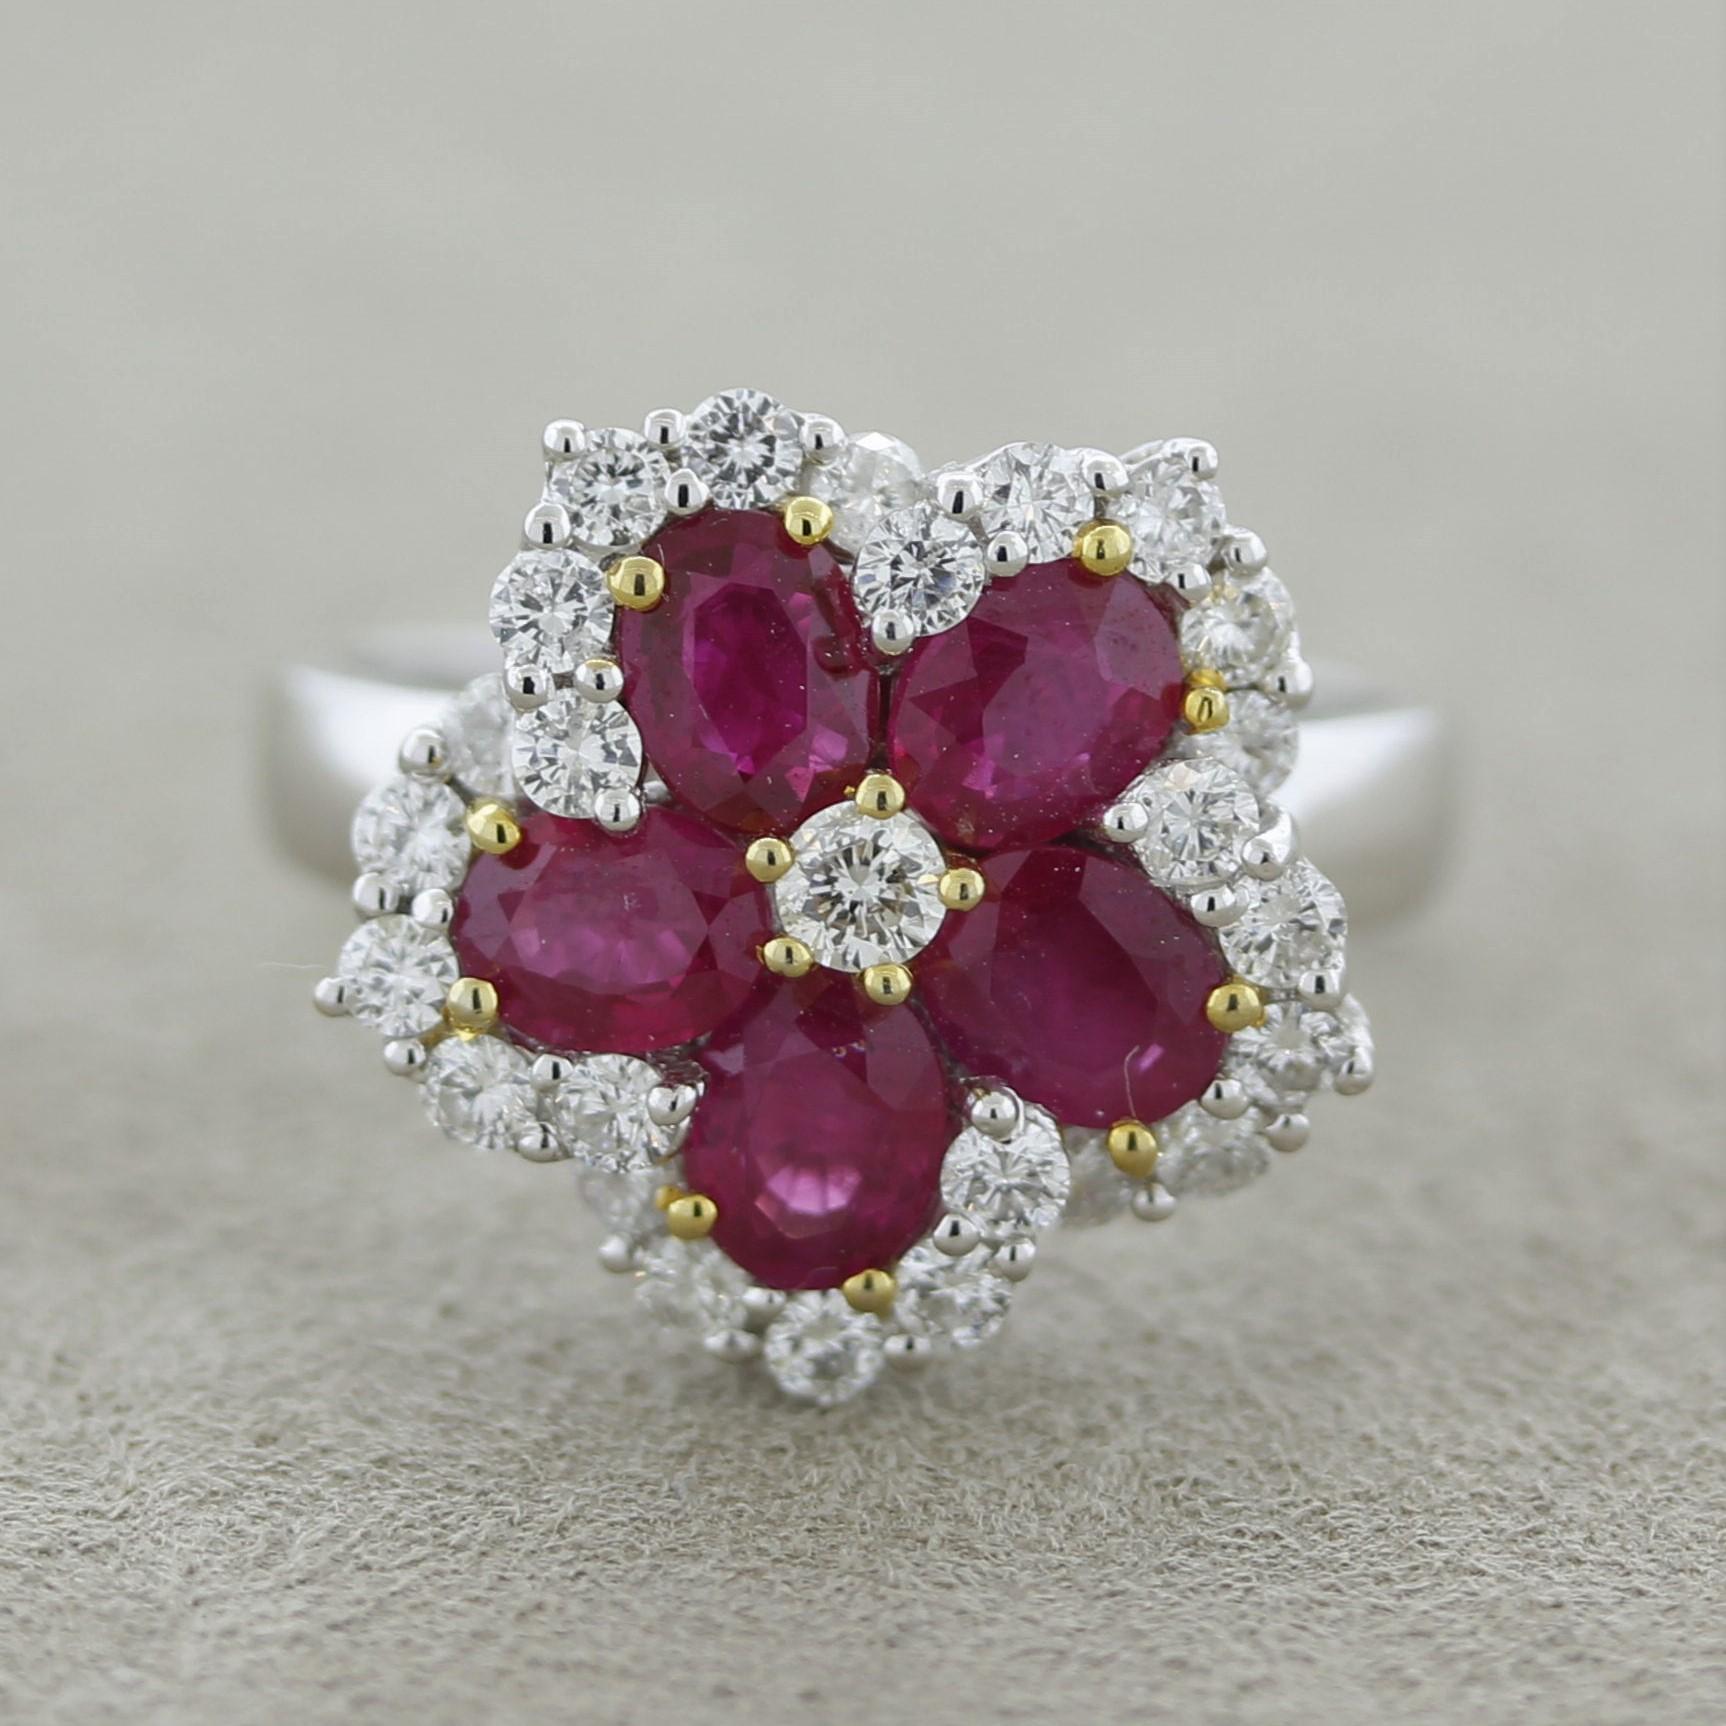 A lovely gemstone ring featuring 5 vivid red oval shaped rubies weighing 2.10 carats. They are set in a flower pattern with 0.76 carats of round brilliant-cut diamonds set on its edges giving the ring brilliance and sparkle. Made in 18k white gold